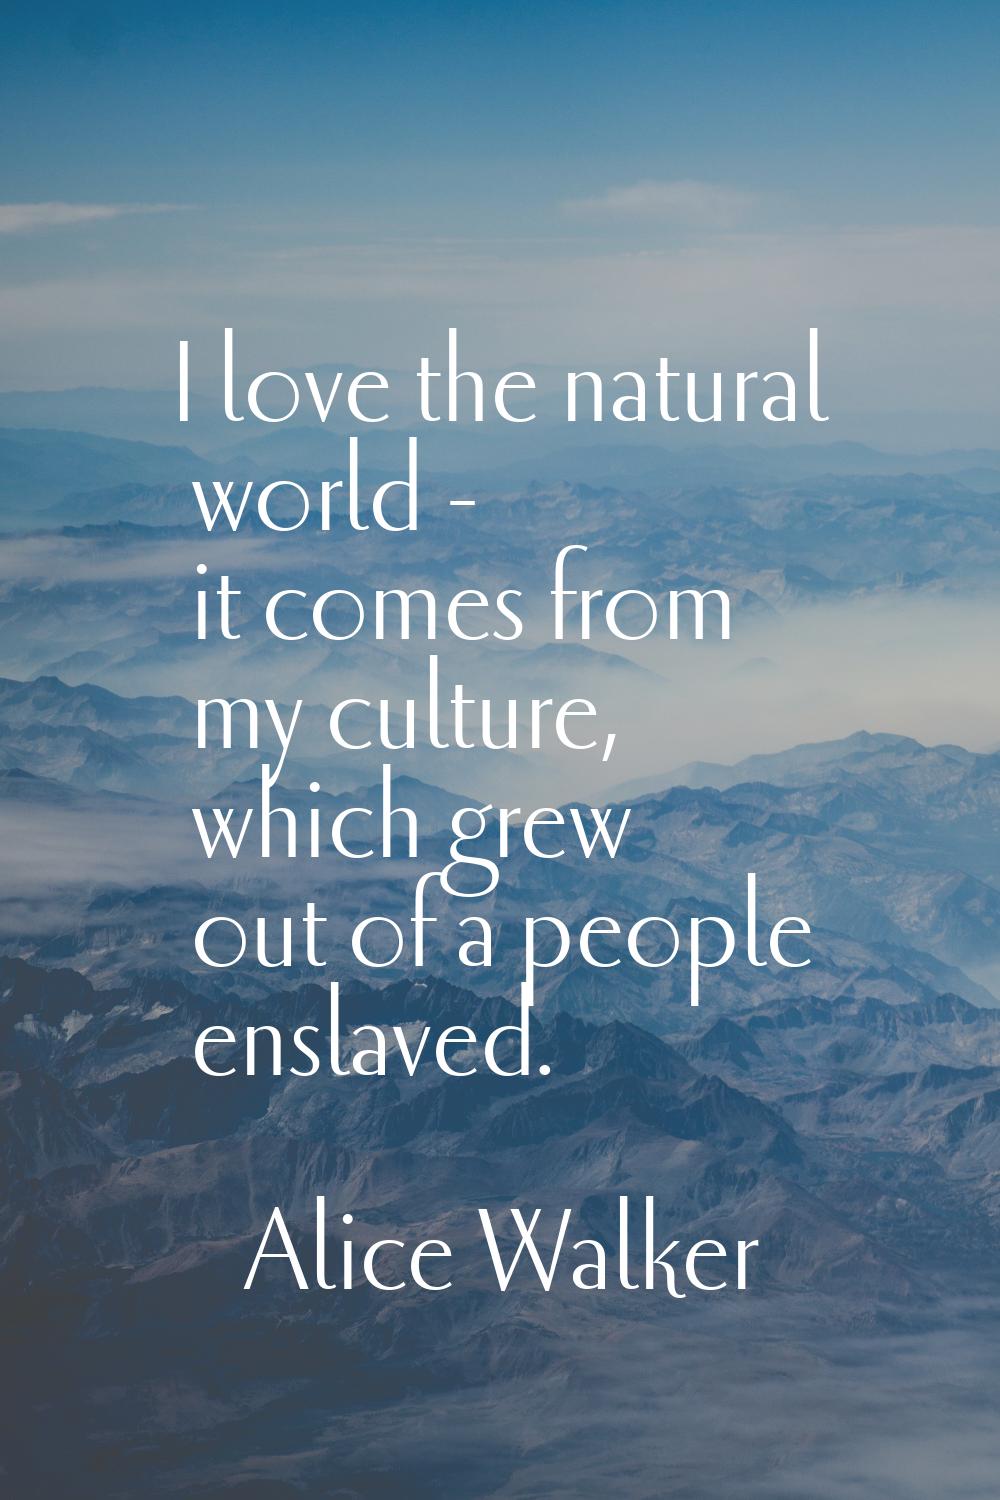 I love the natural world - it comes from my culture, which grew out of a people enslaved.